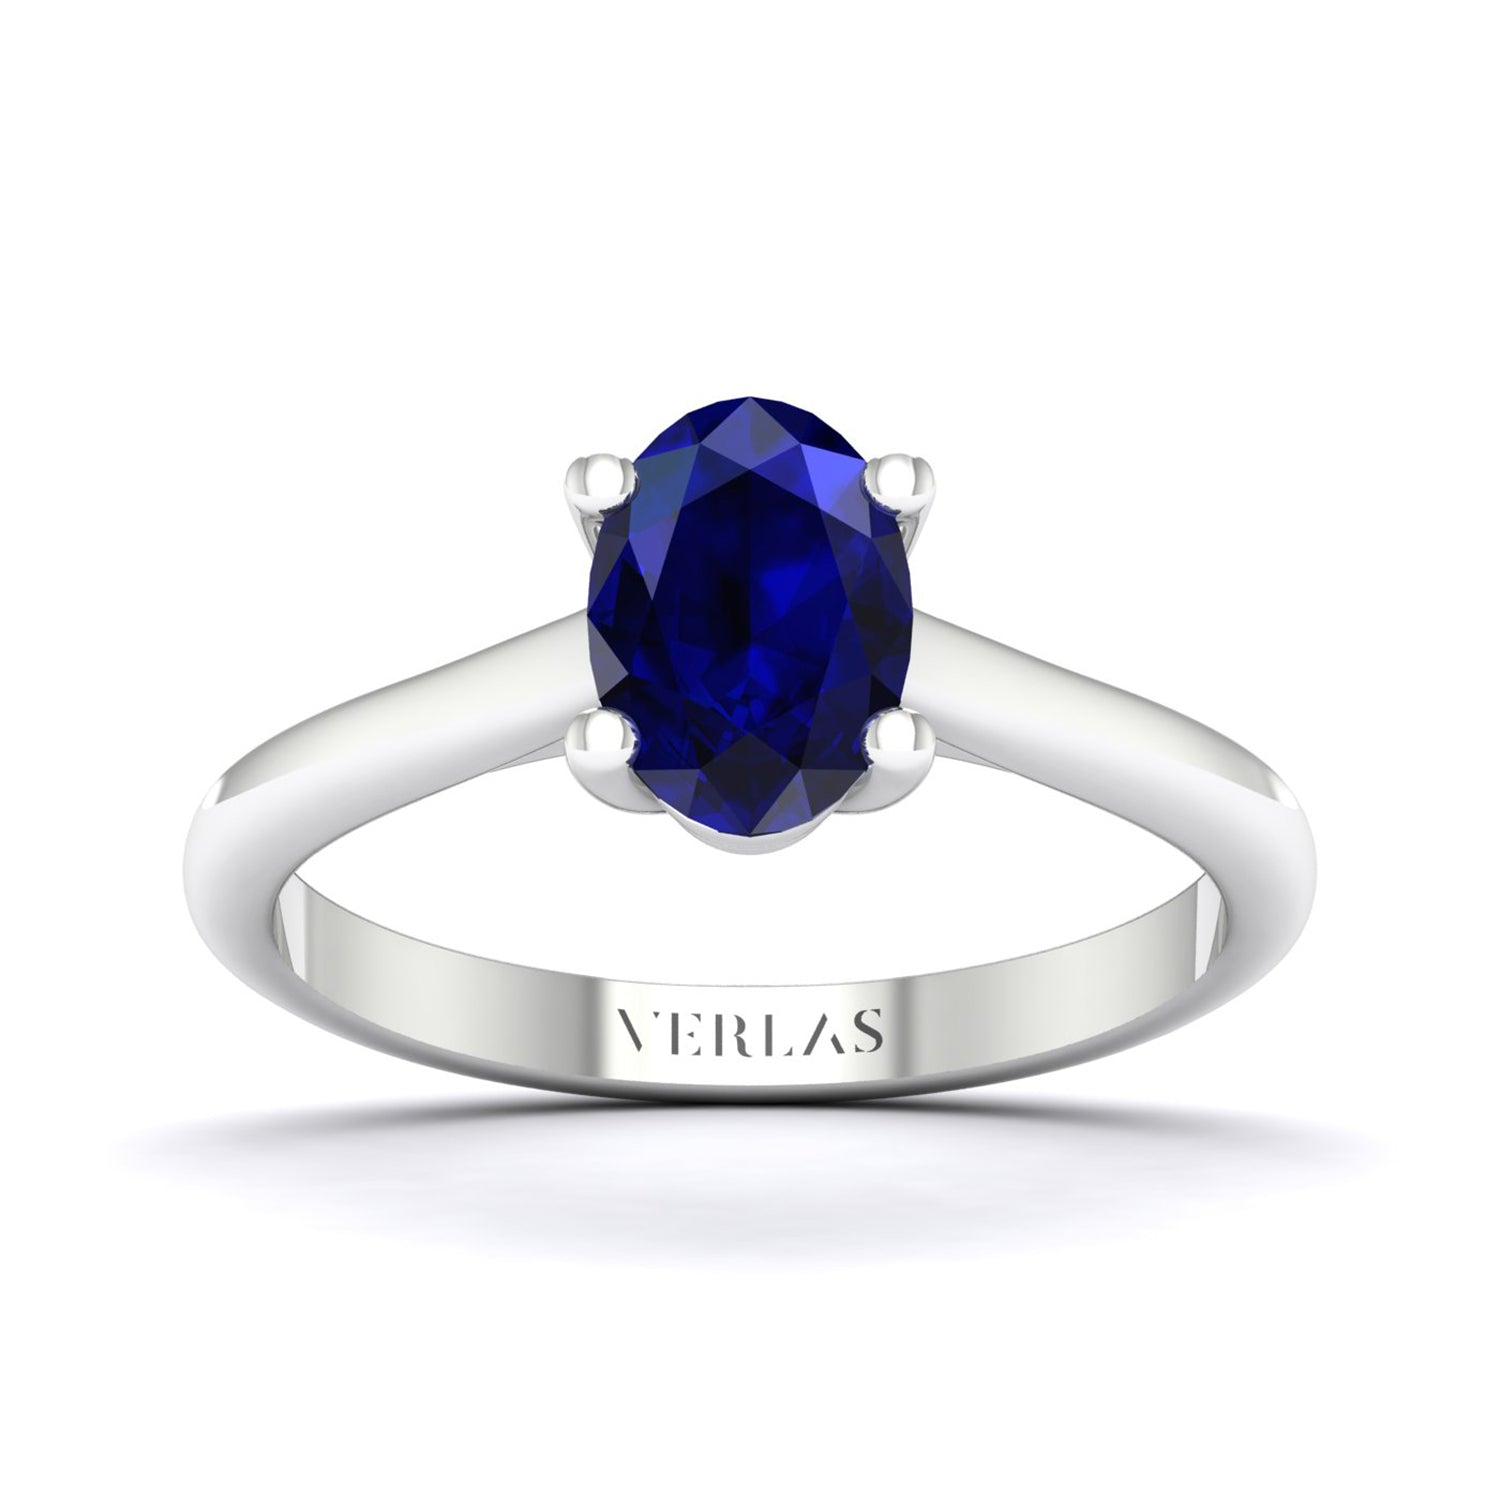 Ellipse Gemstone Chalice Ring_Product Angle_Blue Sapphire - 1